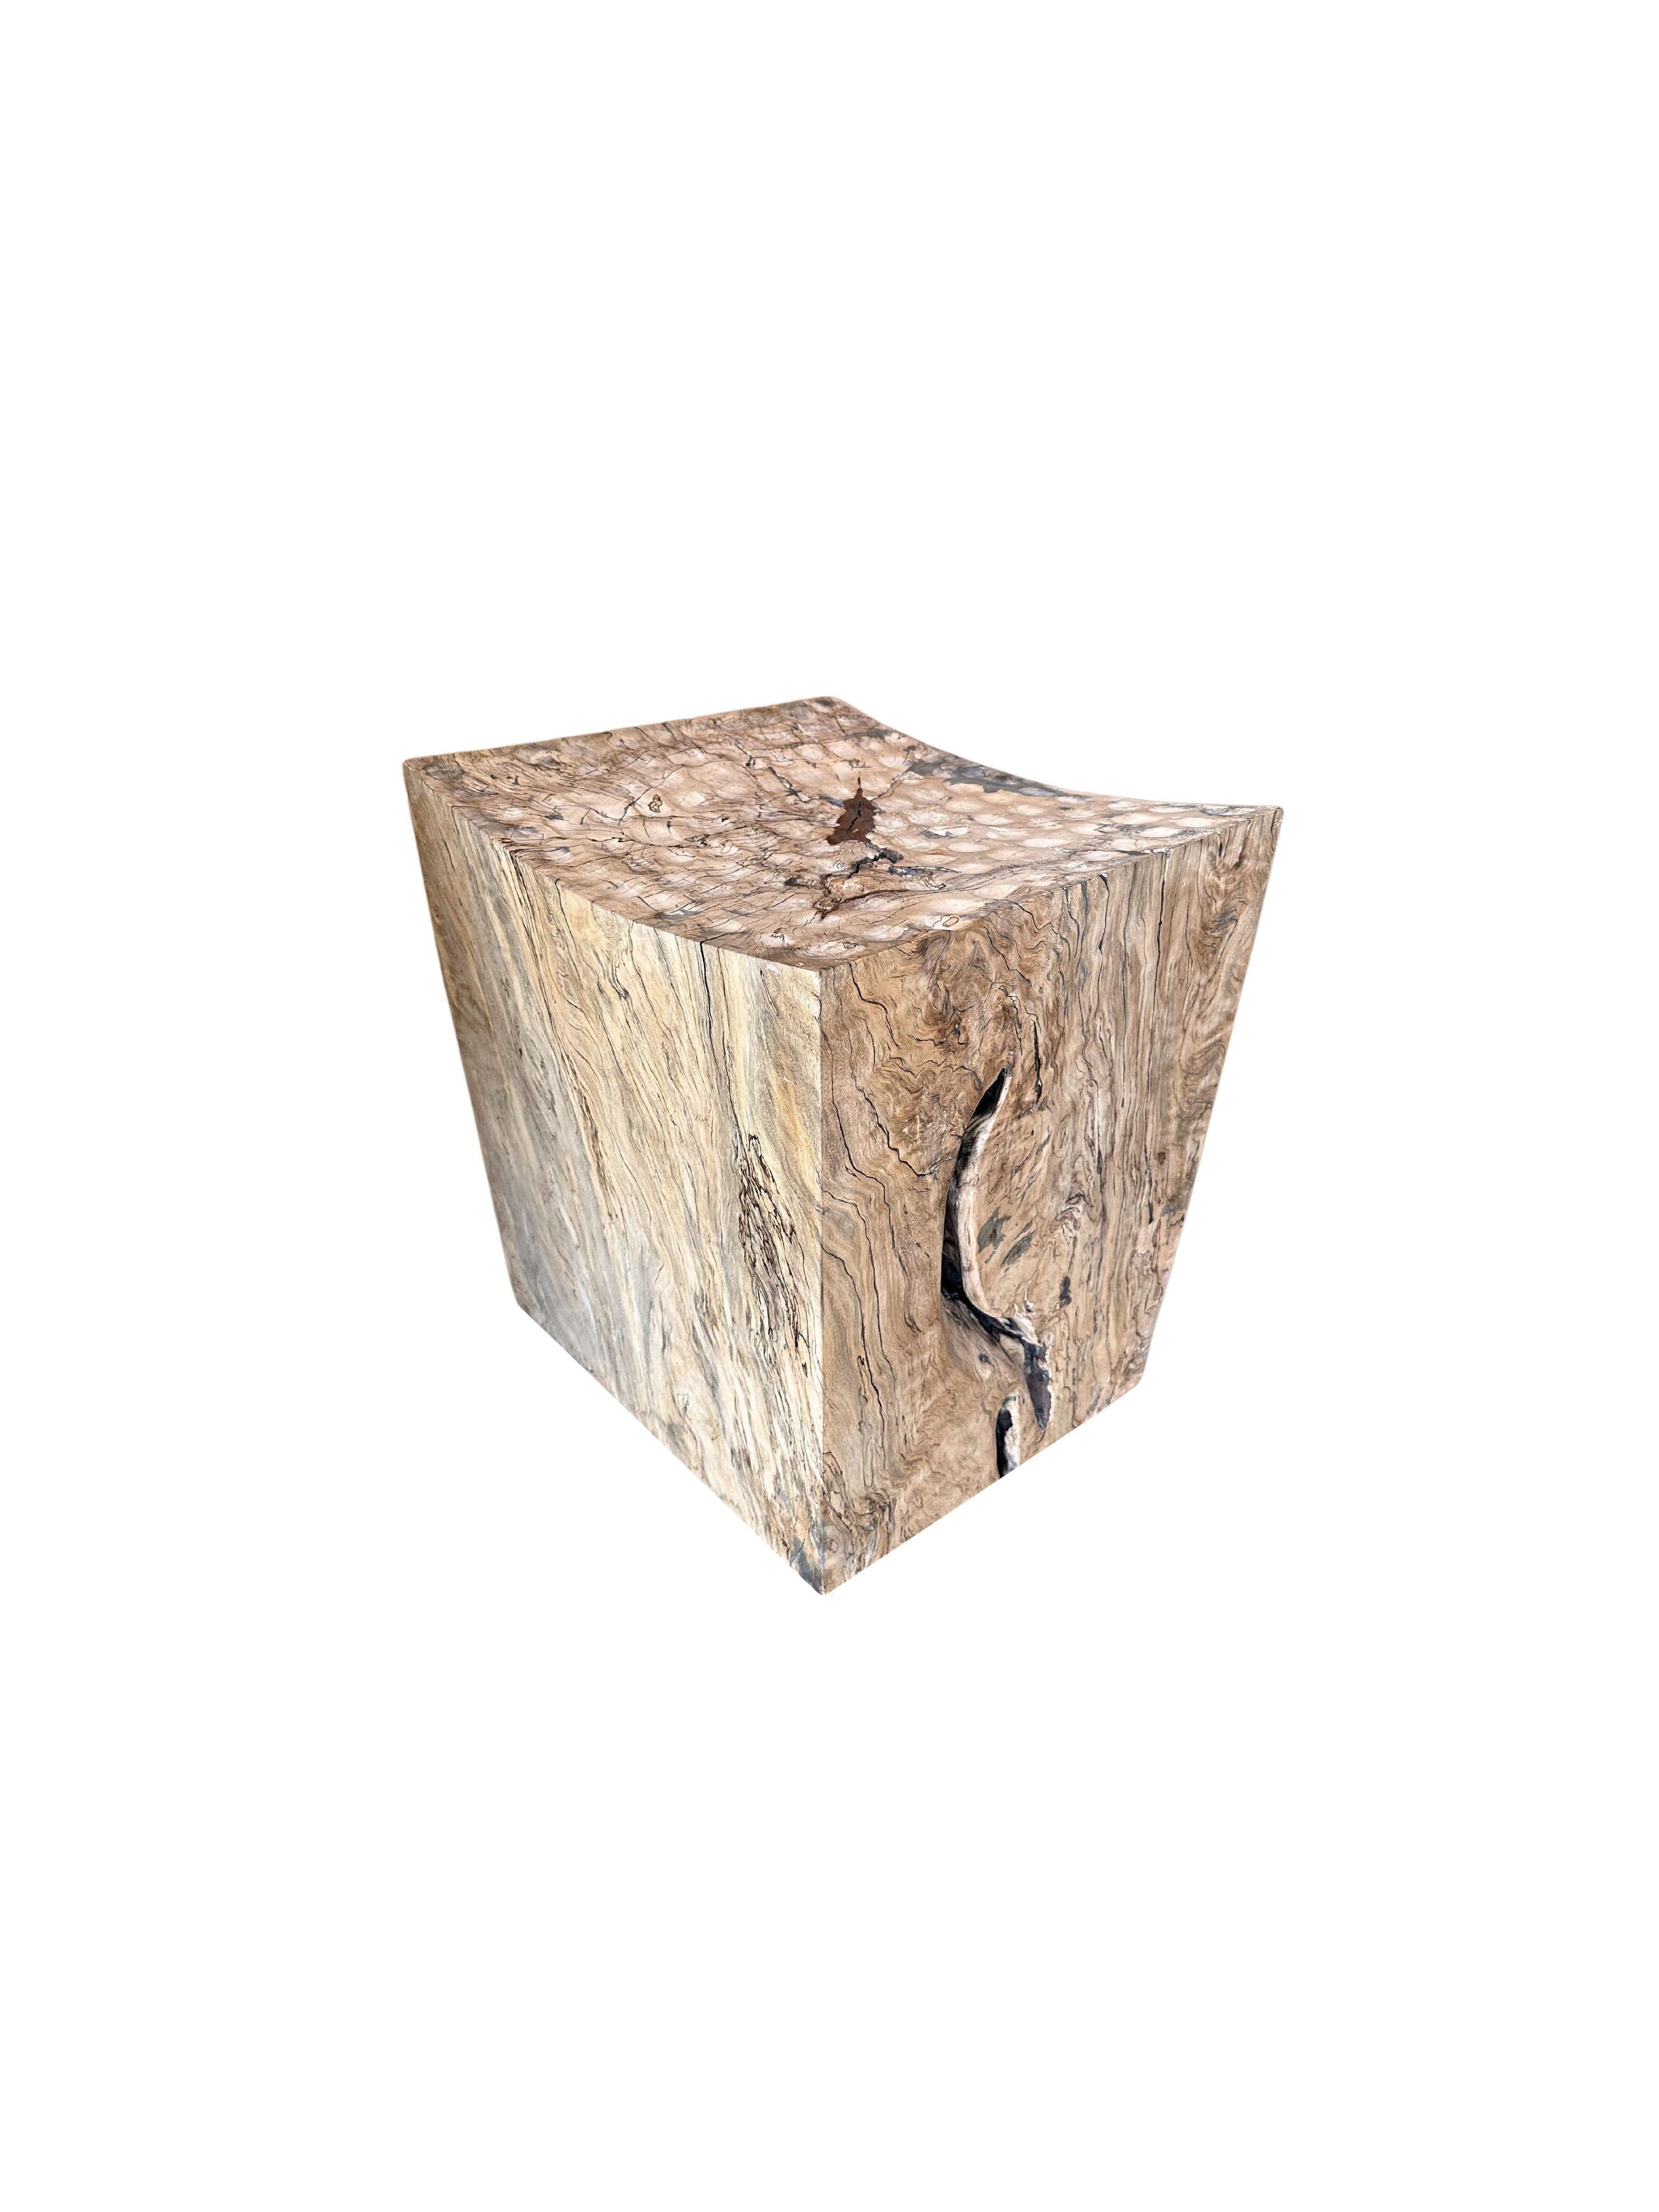 Sculptural Stool Carved from Solid Tamarind Wood Modern Organic In New Condition For Sale In Jimbaran, Bali